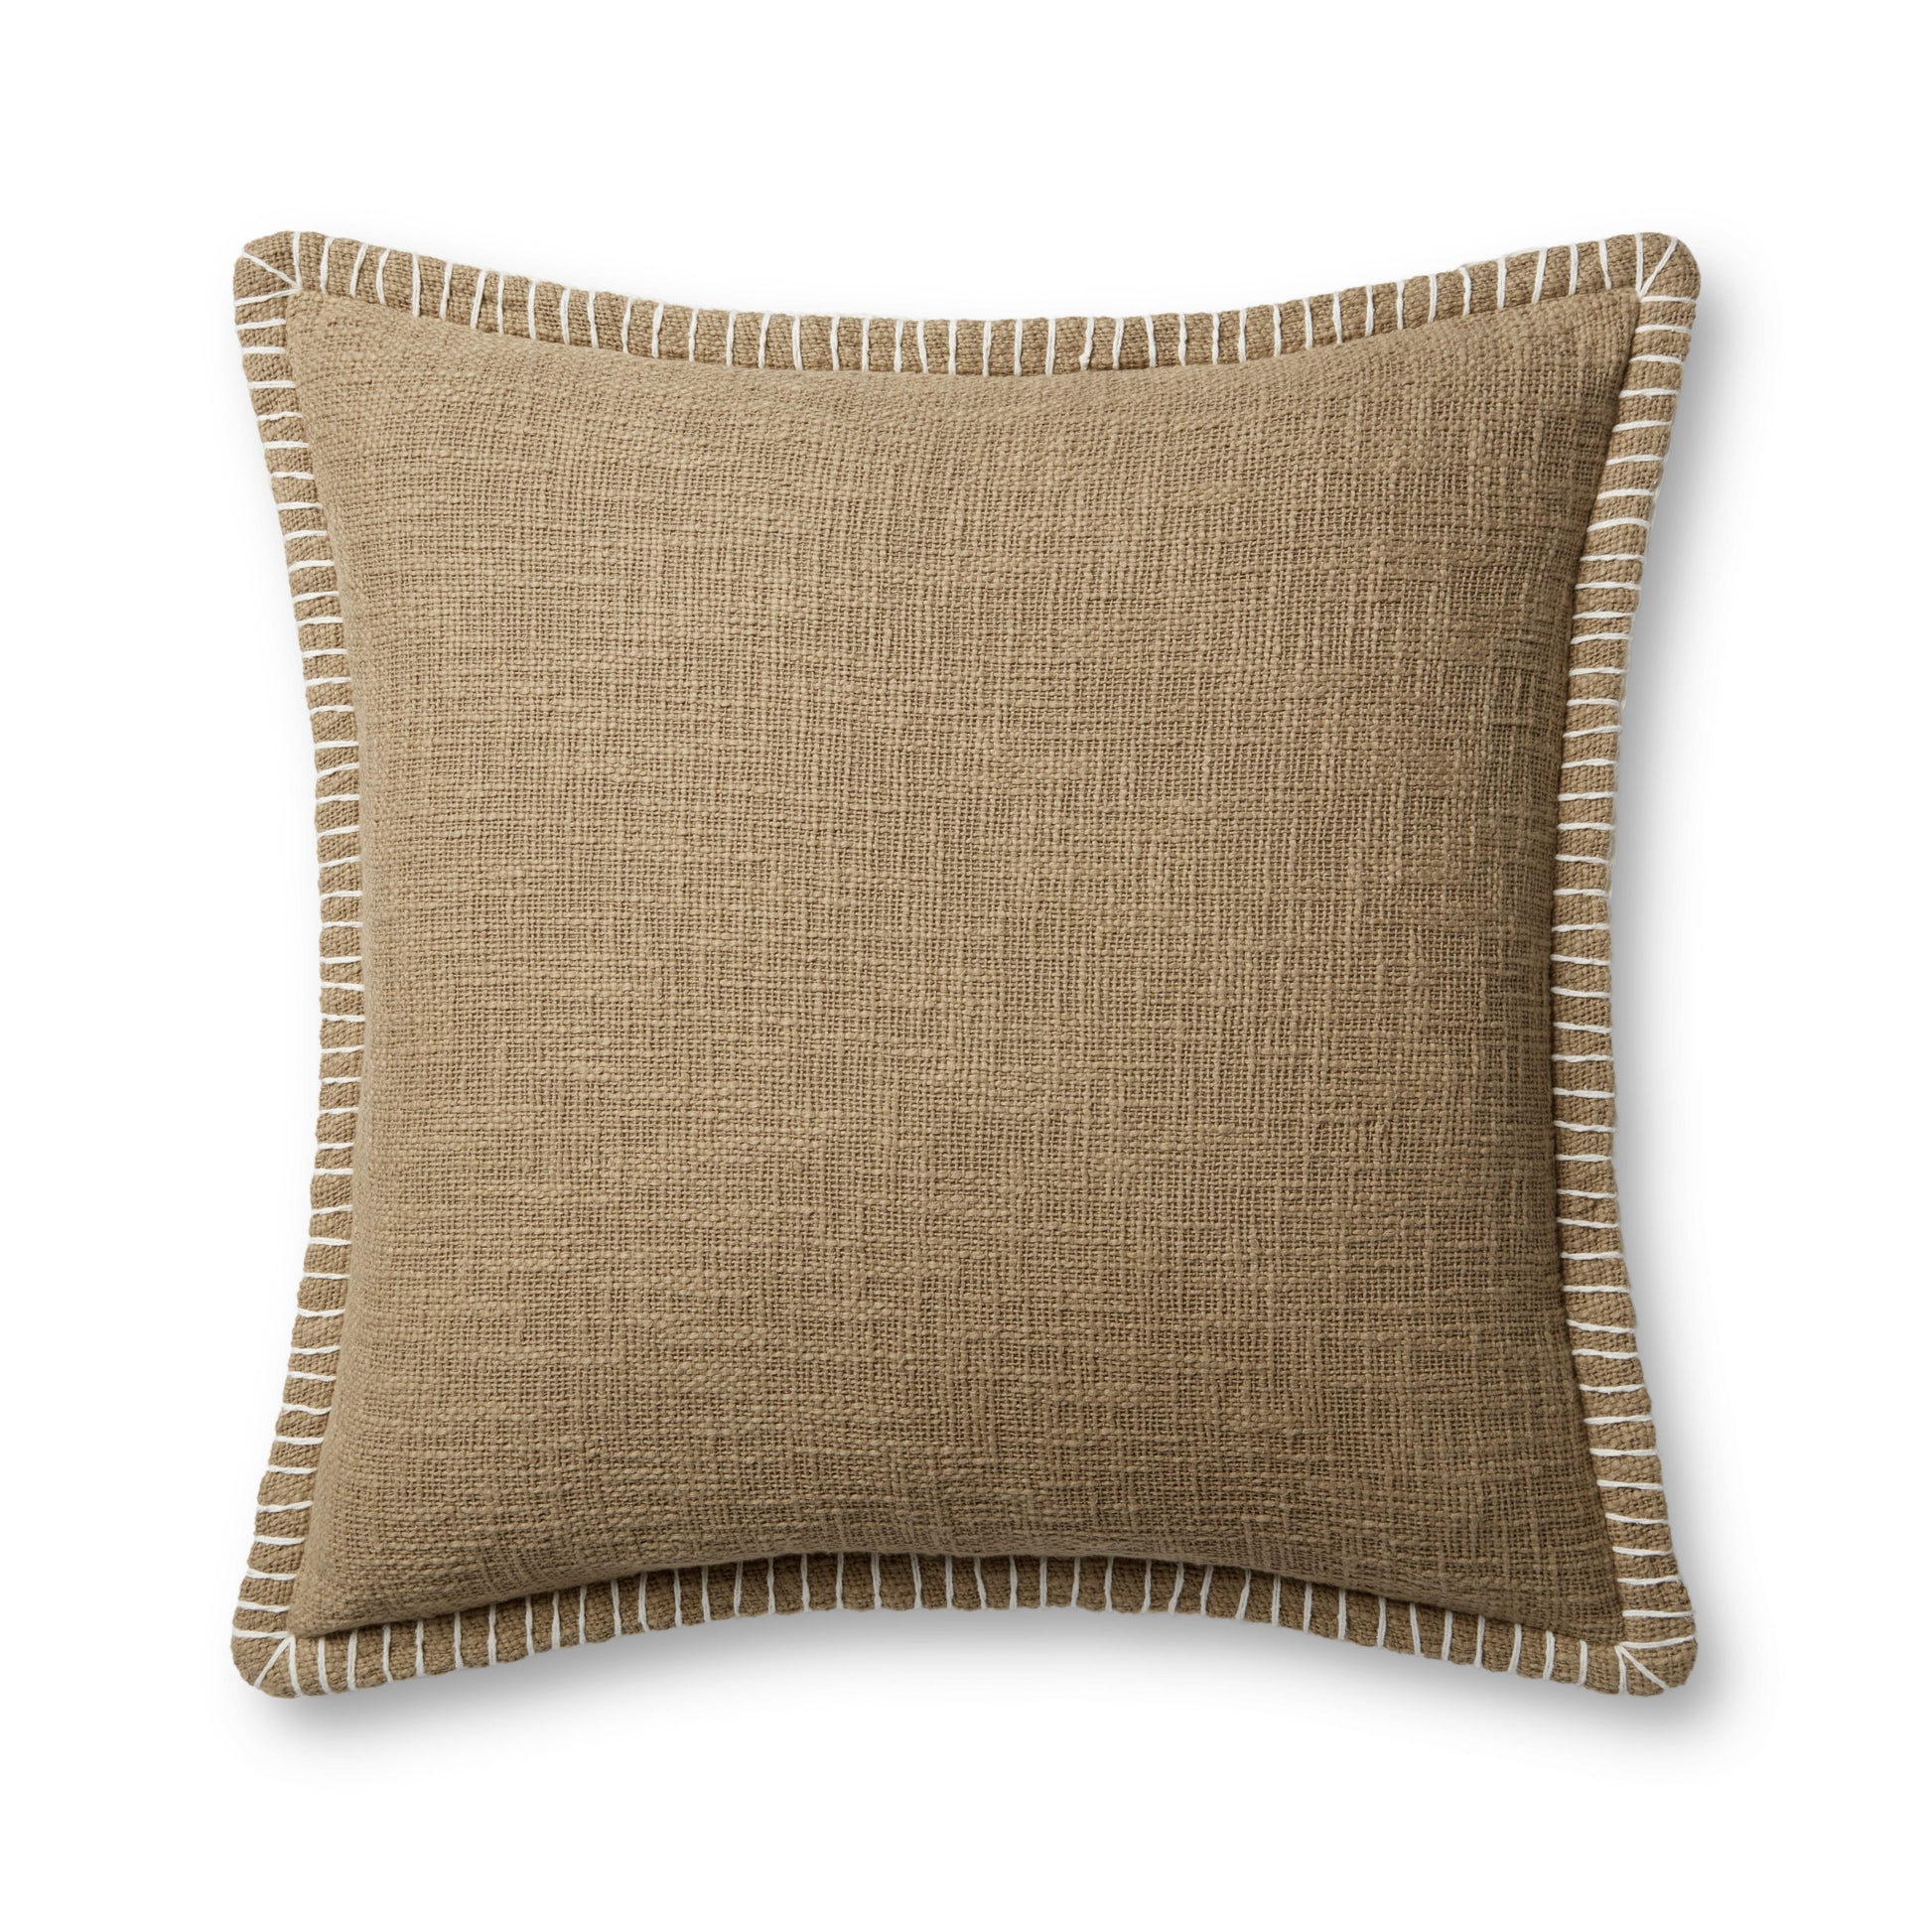 Photo of a pillow;  PLL0109 Taupe 22'' x 22'' Cover w/Poly Pillow